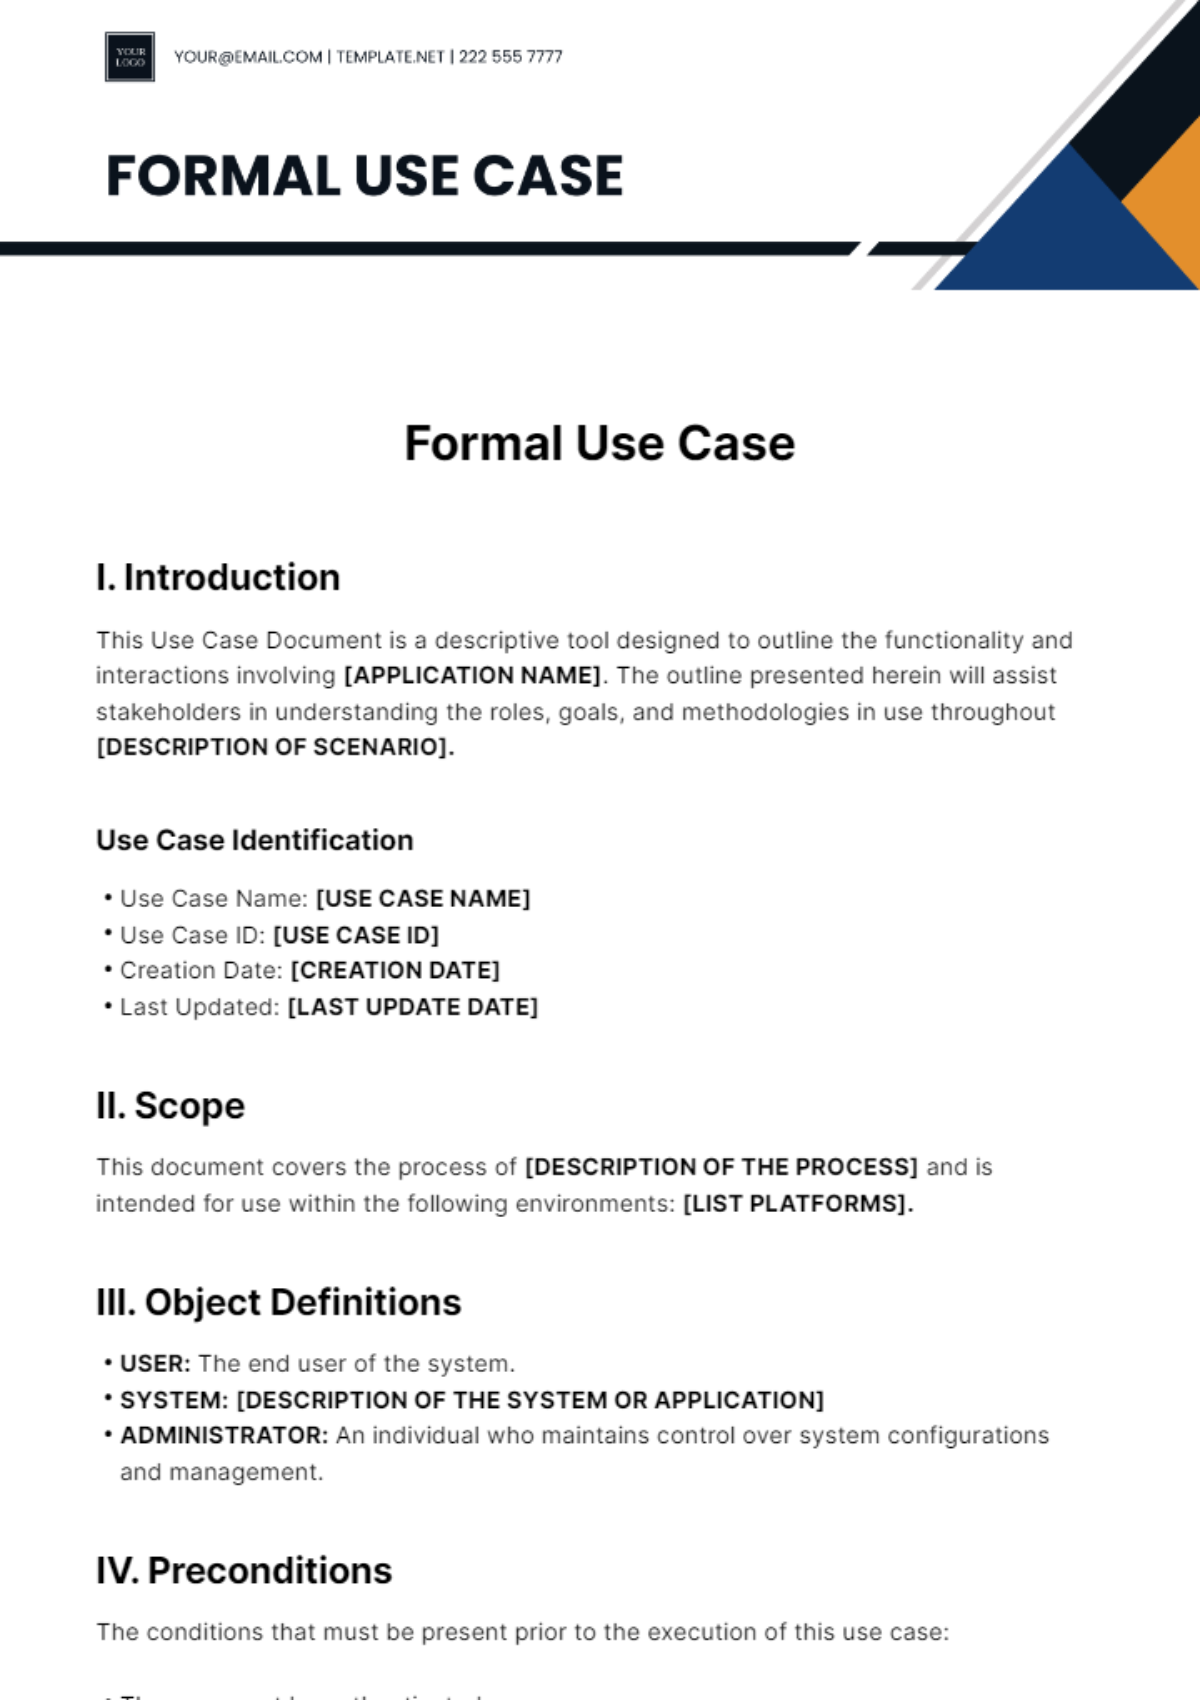 Formal Use Case Template